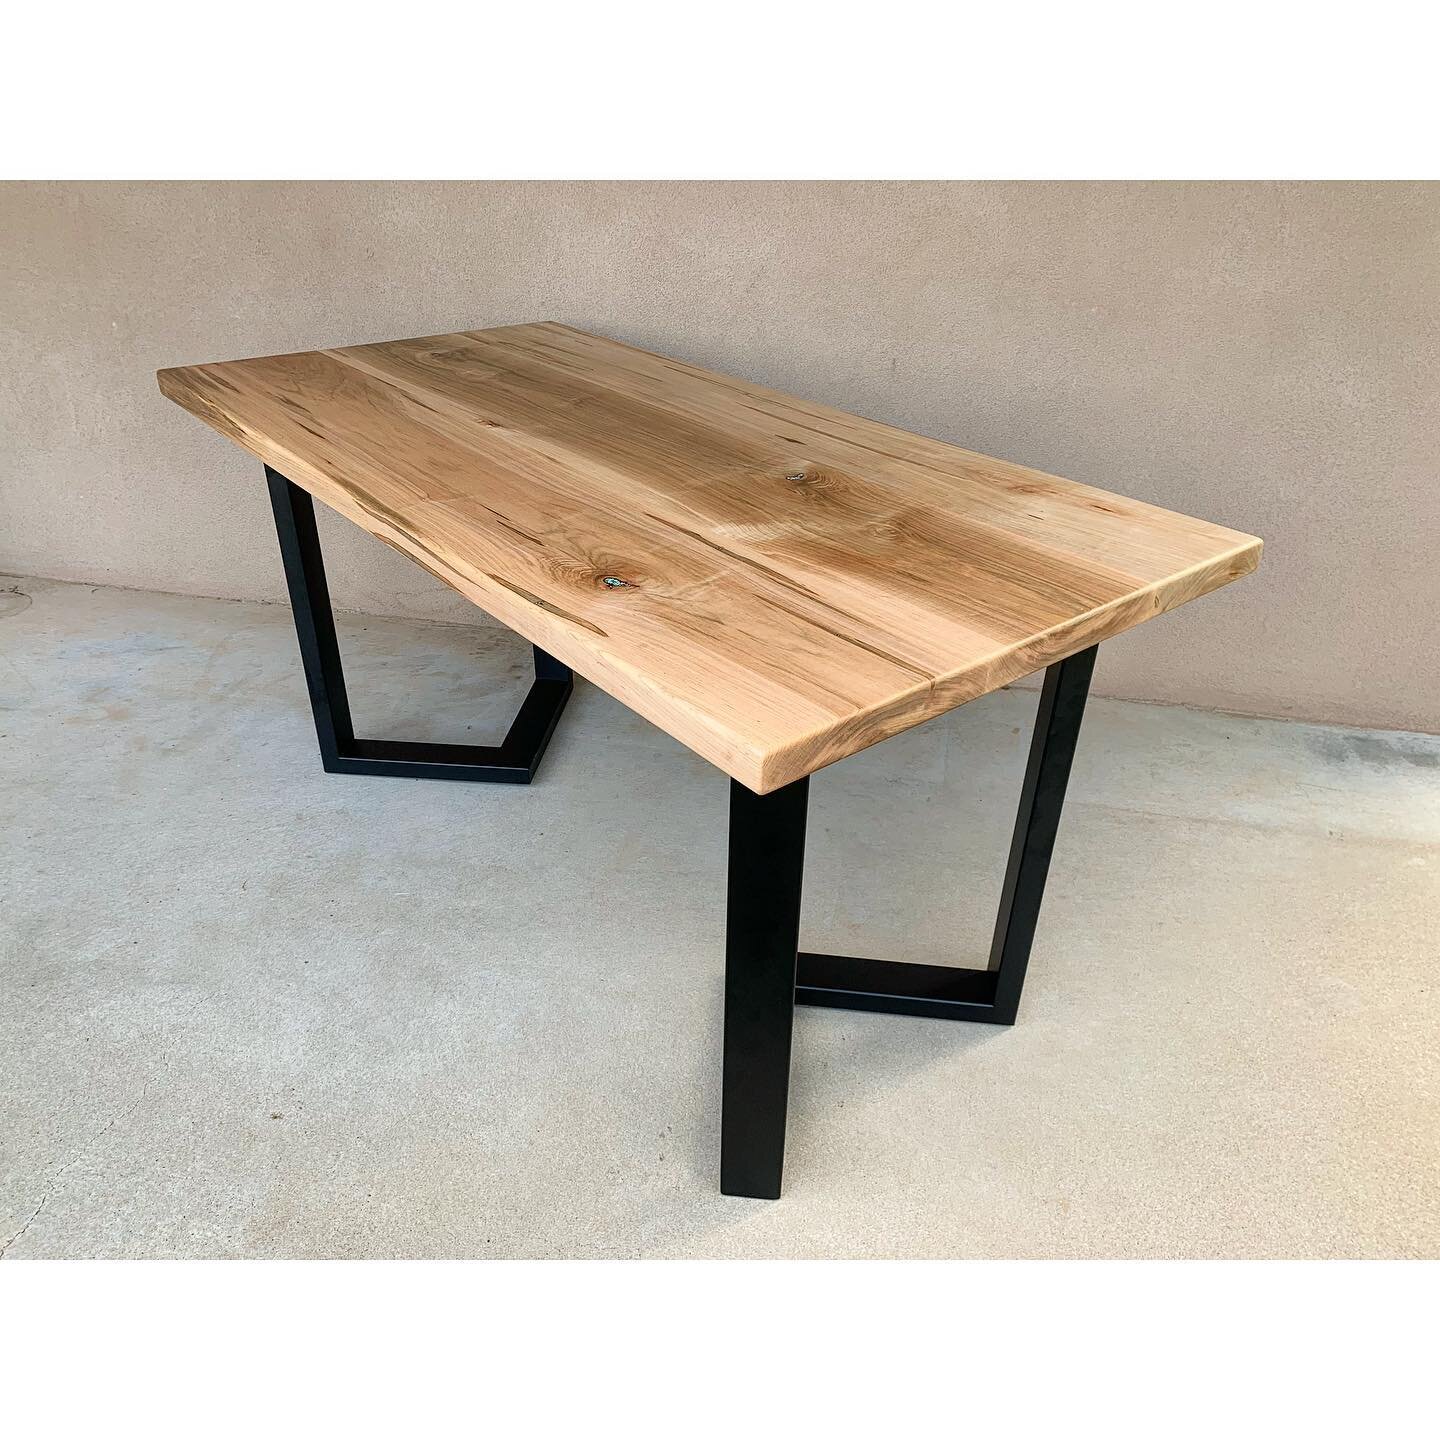 Ambrosia Maple Dining Table with Cerrillos Turquoise Inlays and matte black powder coated metal base.  60&rdquo; x 30&rdquo;. We built this small dining table to fit in a tiny home. 
.
.
.

#tetradesignworks #furnituredesign #furniture #design #inter